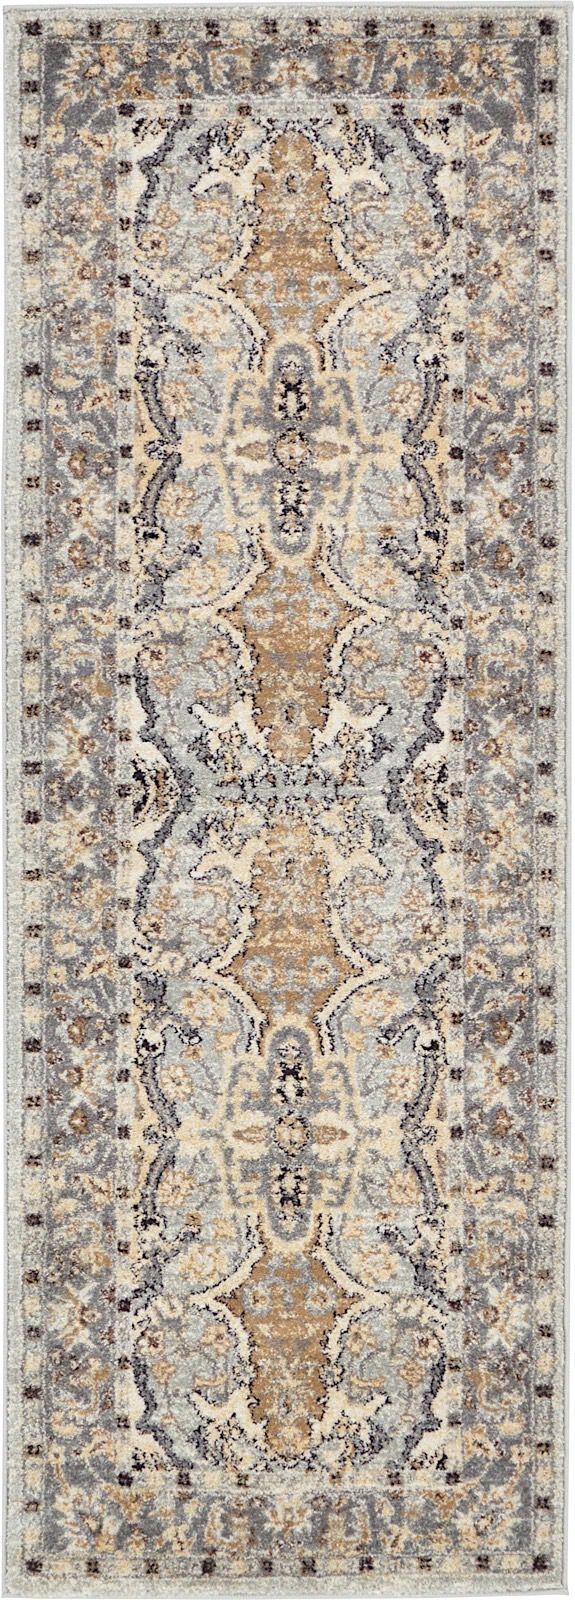 unique loom tradition traditional area rug collection